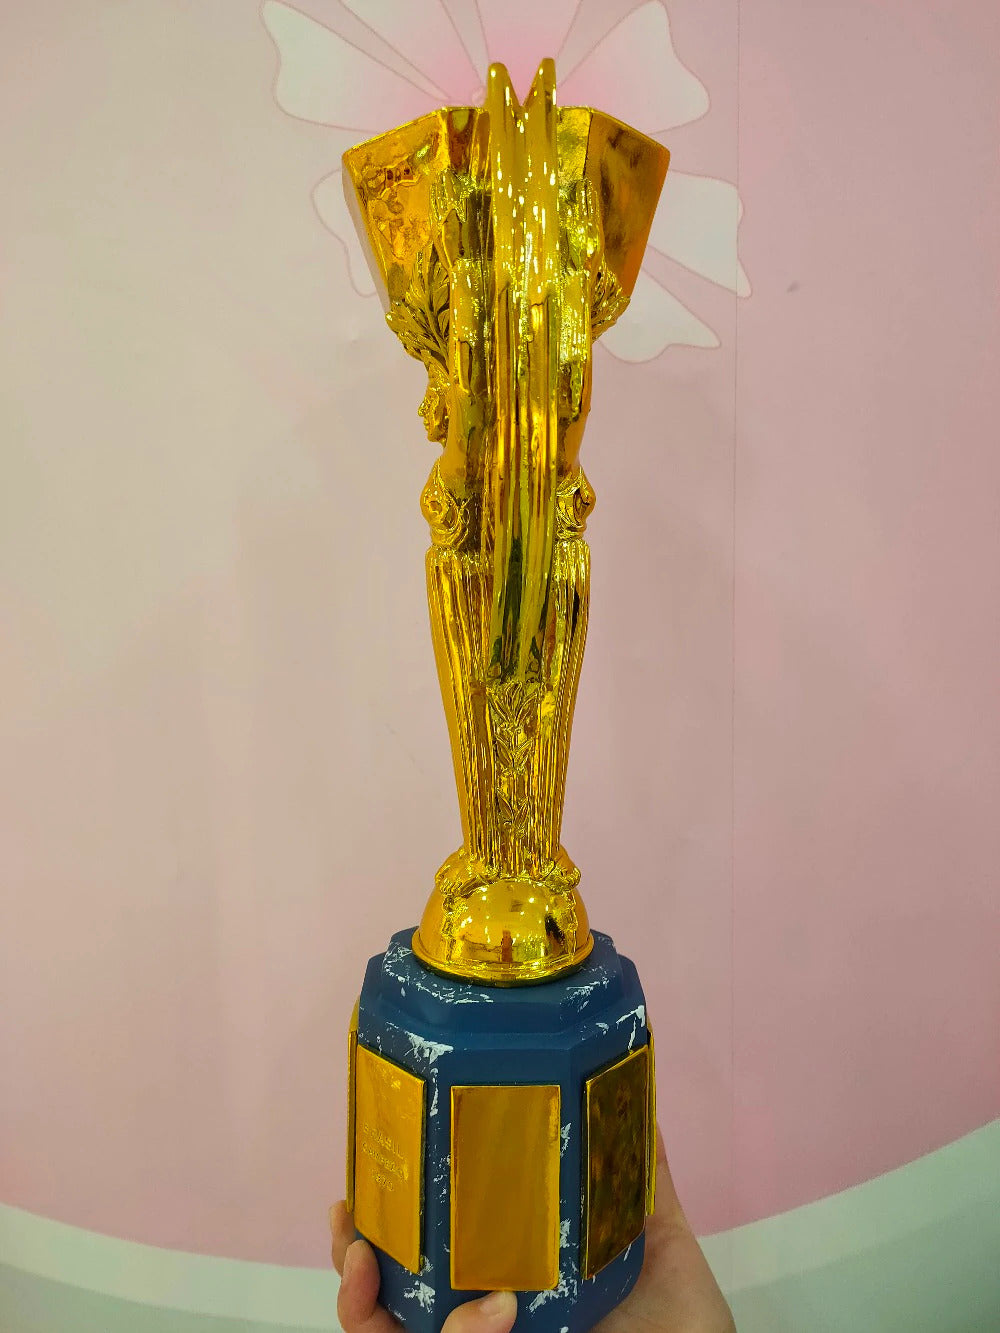 Replica soccer world cup trophy - Fineartsfrance